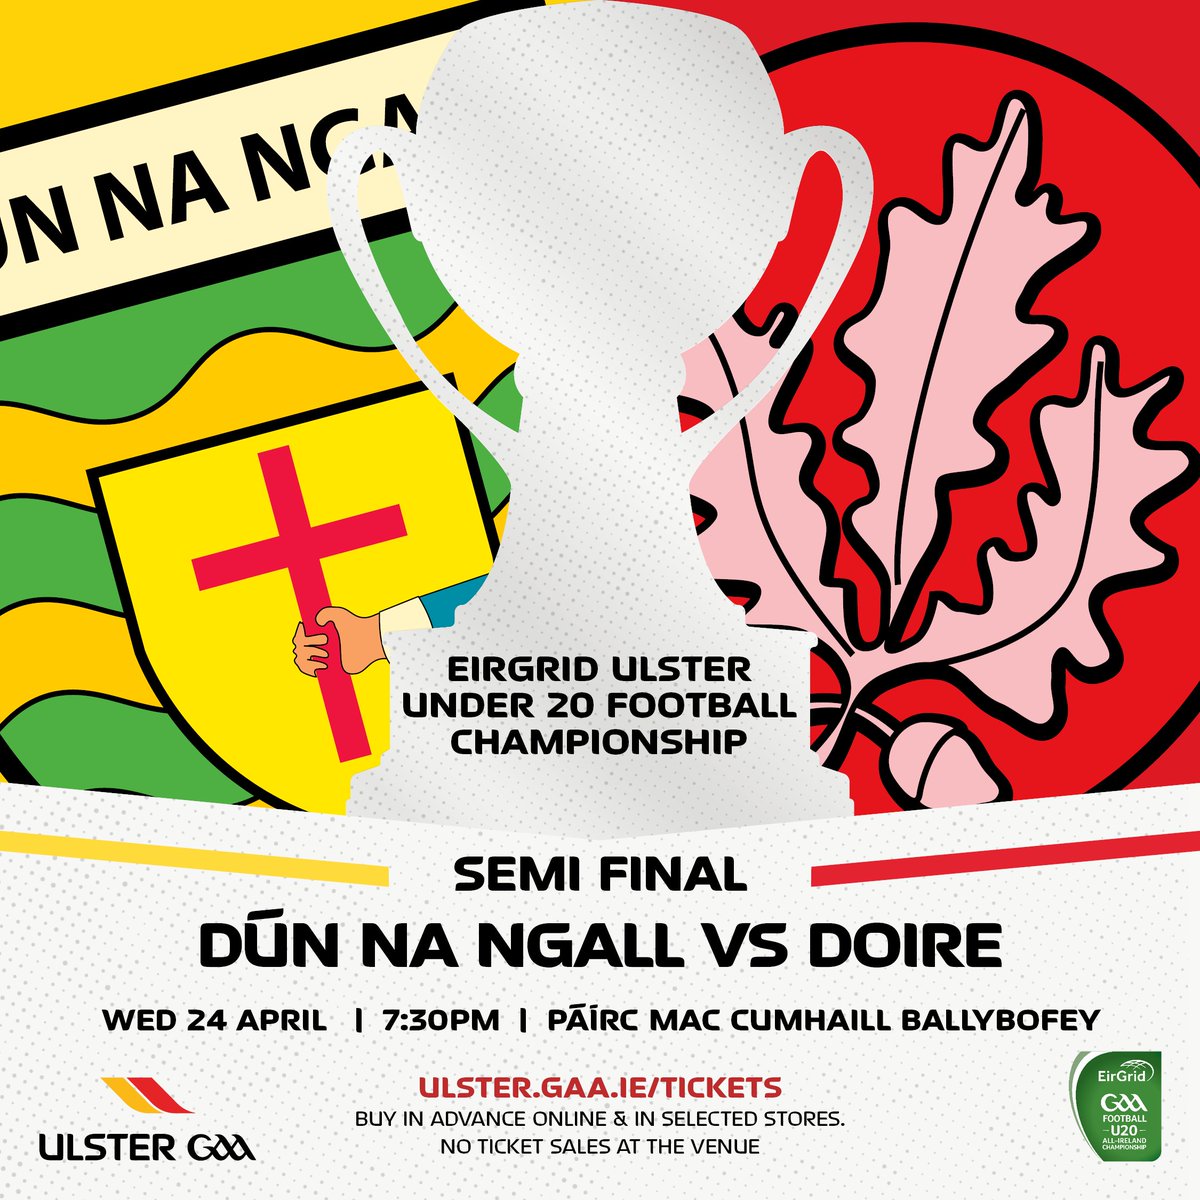 2024 @EirGrid Ulster Under-20 Football Championship Semi Final 🏐 @officialdonegal 🟨🟩 v @Doiregaa🟥⬜️ Wed 24th April 7.30pm Páirc Mac Cumhaill Ballybofey 🎟️ Buy tickets in advance online. No sales at venue ➡️ tinyurl.com/cw34fmtd #Ulster2024